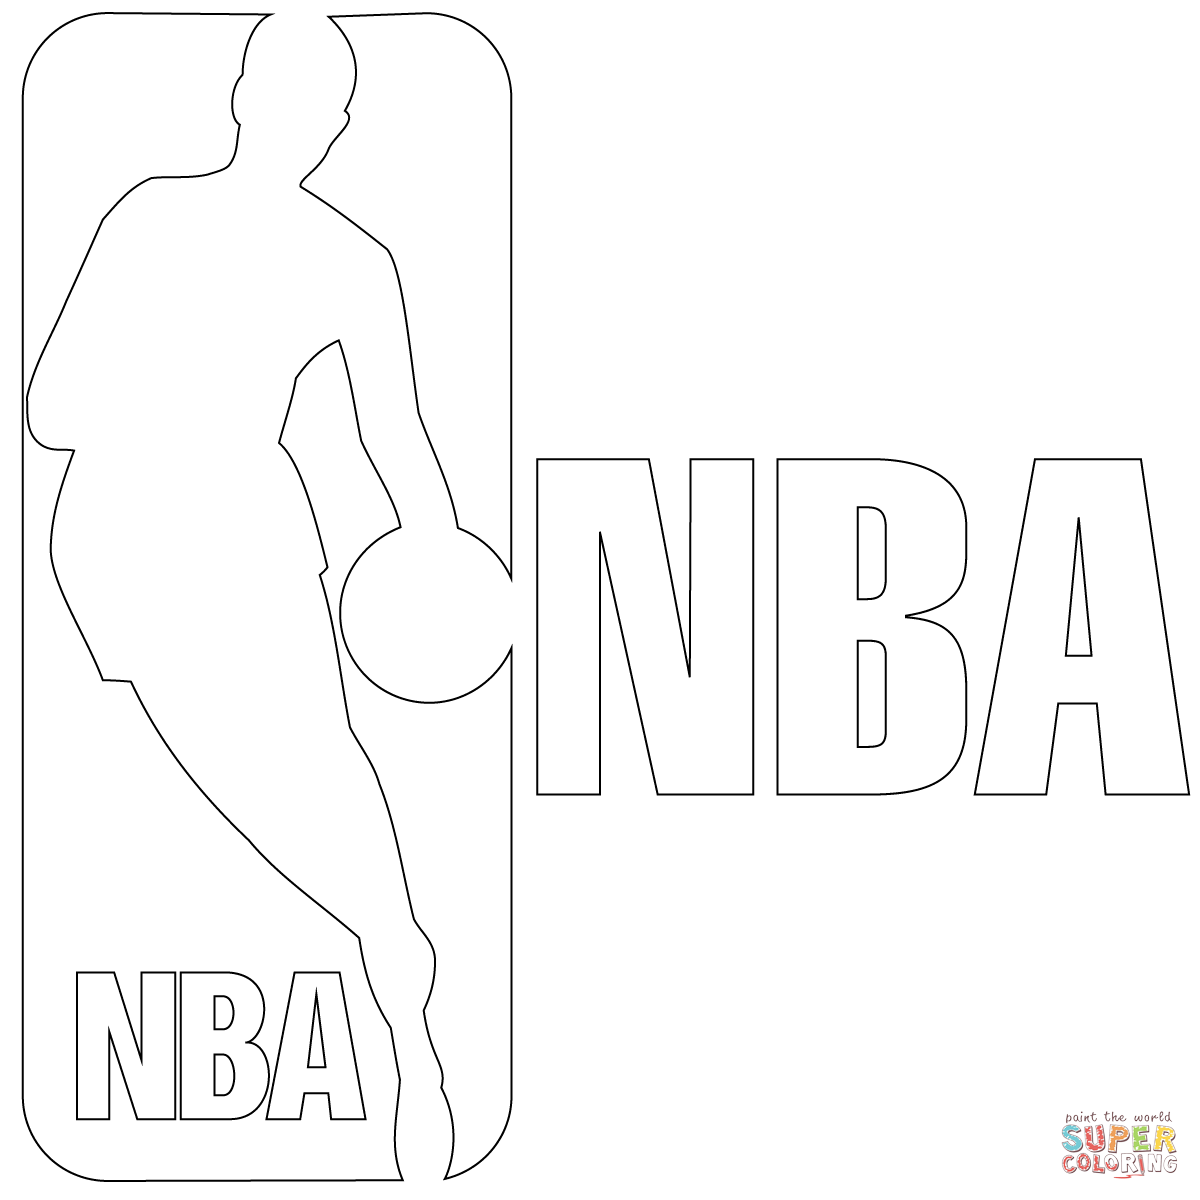 Nba logo coloring page free printable coloring pages